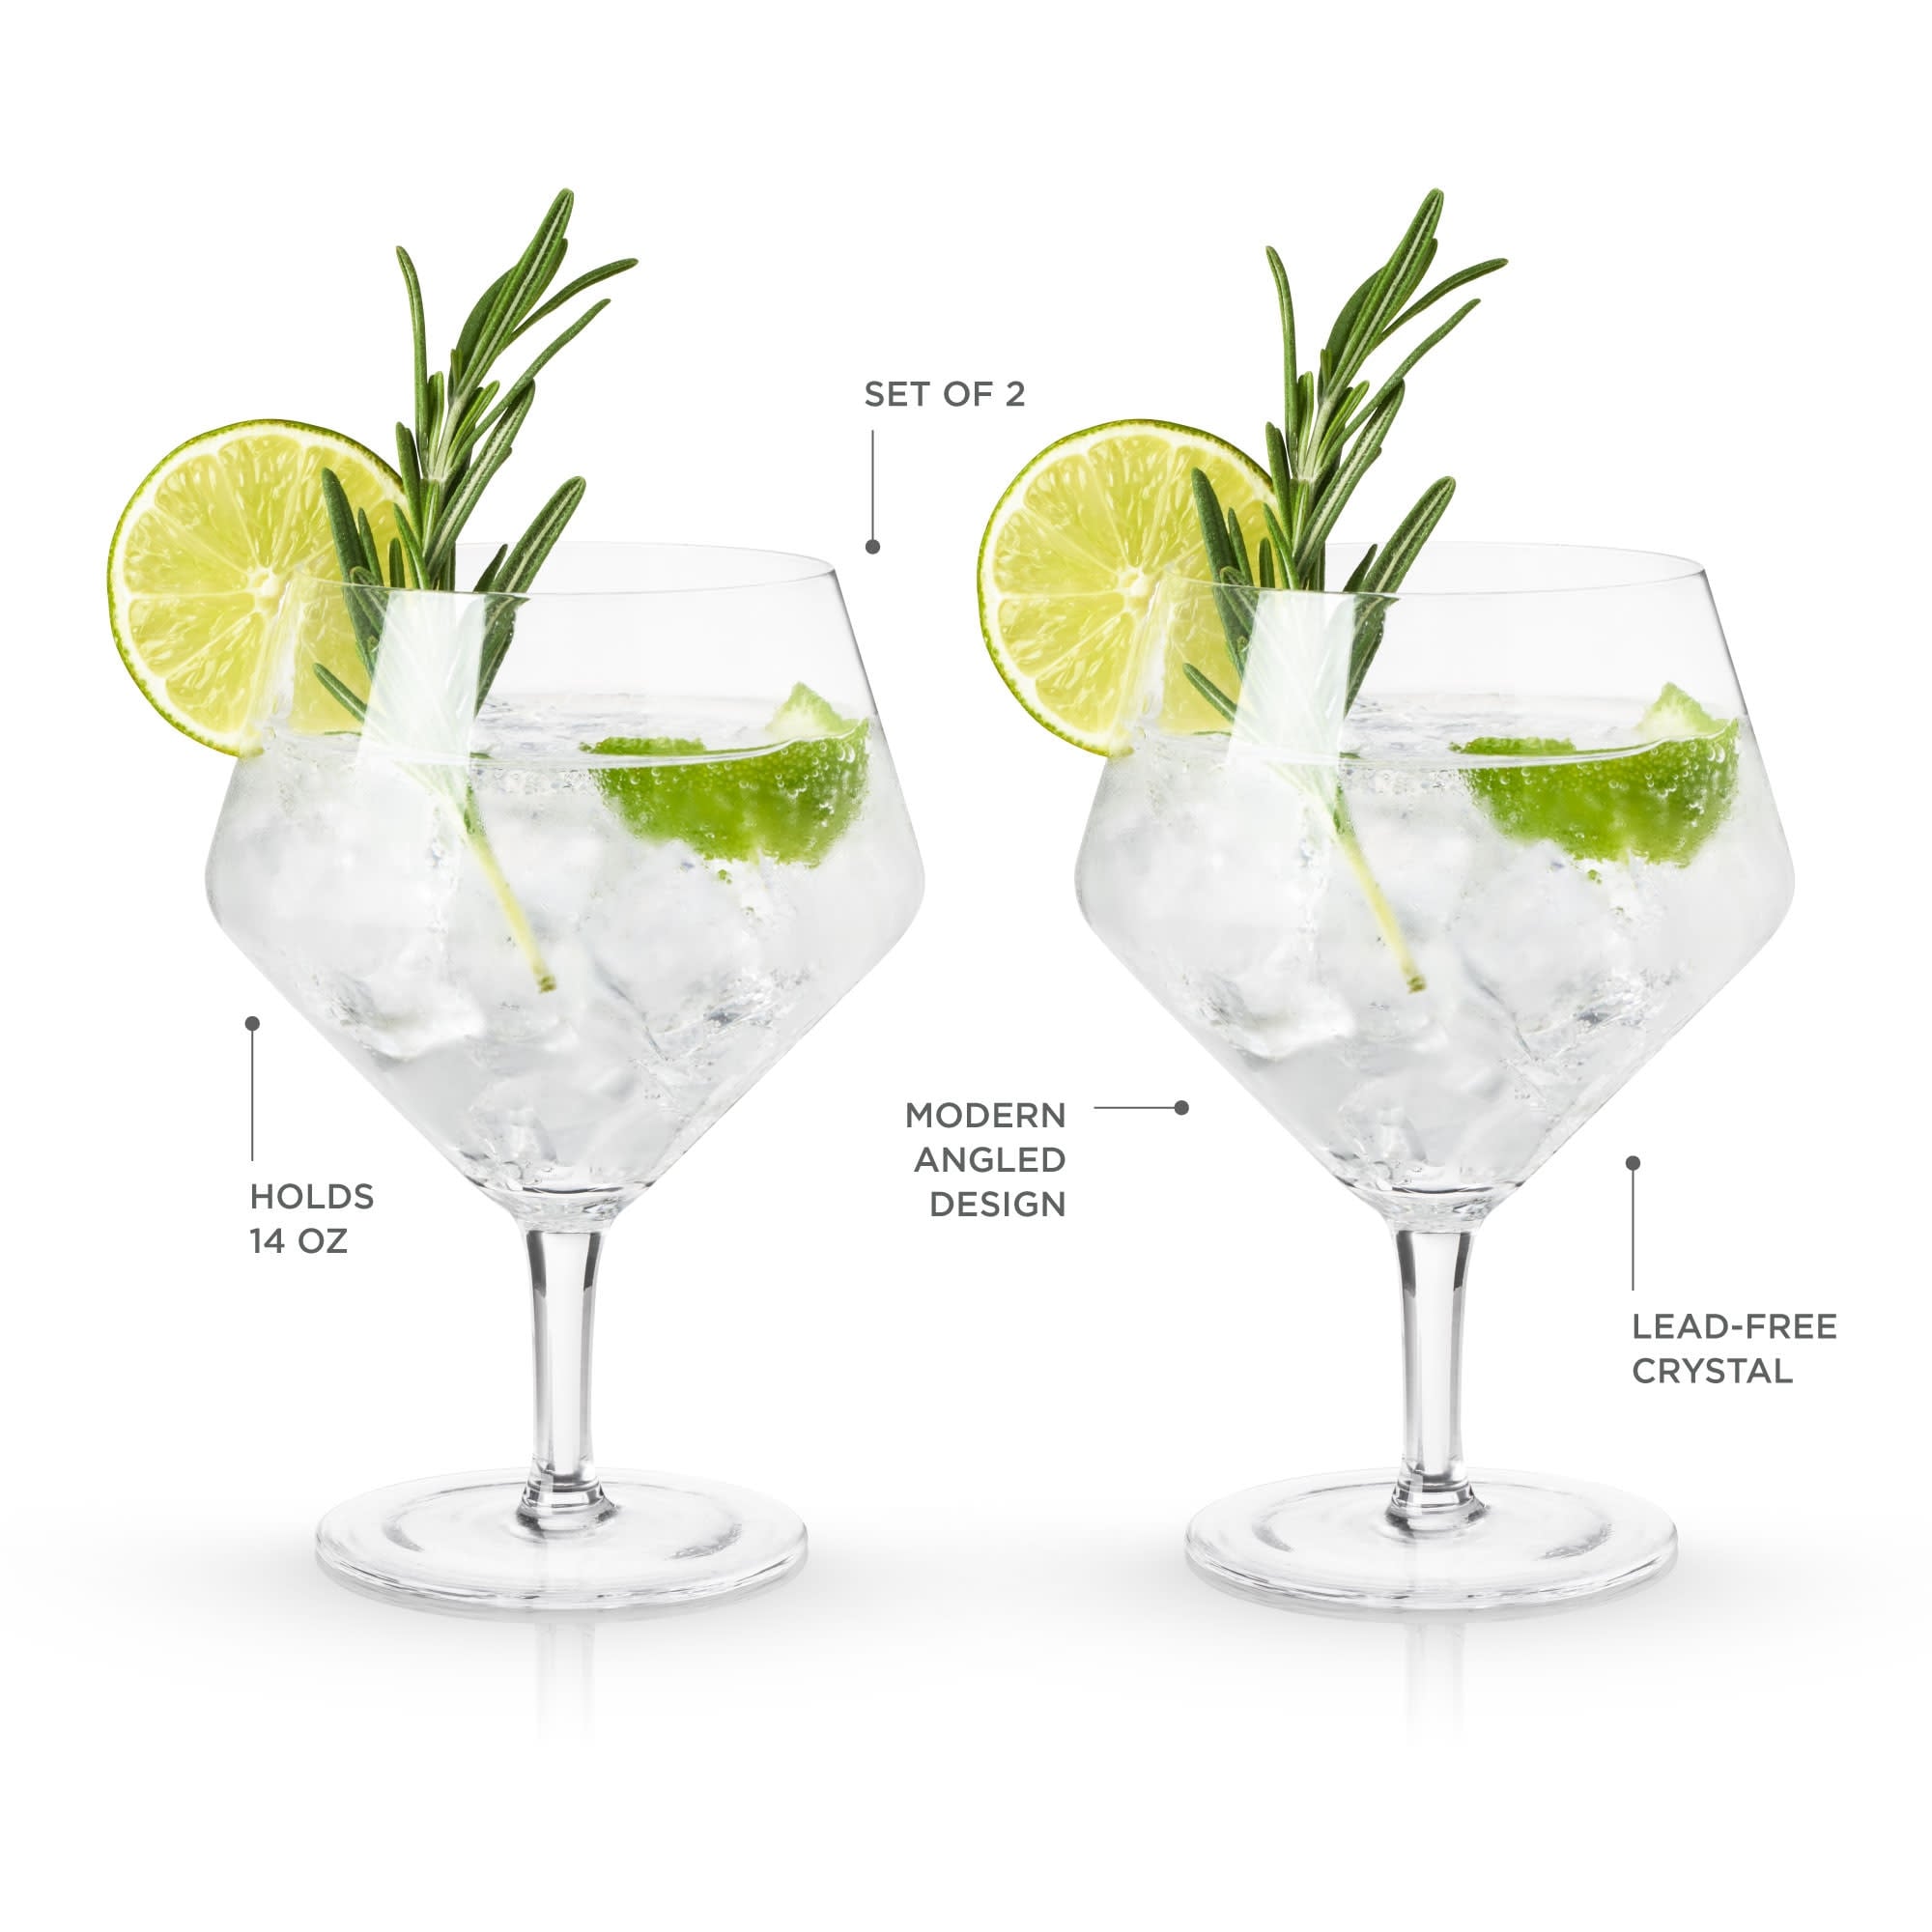 https://ak1.ostkcdn.com/images/products/is/images/direct/467d60682459e675c941e2ed0ece0f17ef0cafe9/Angled-Crystal-Gin-%26-Tonic-Glasses-by-Viski.jpg